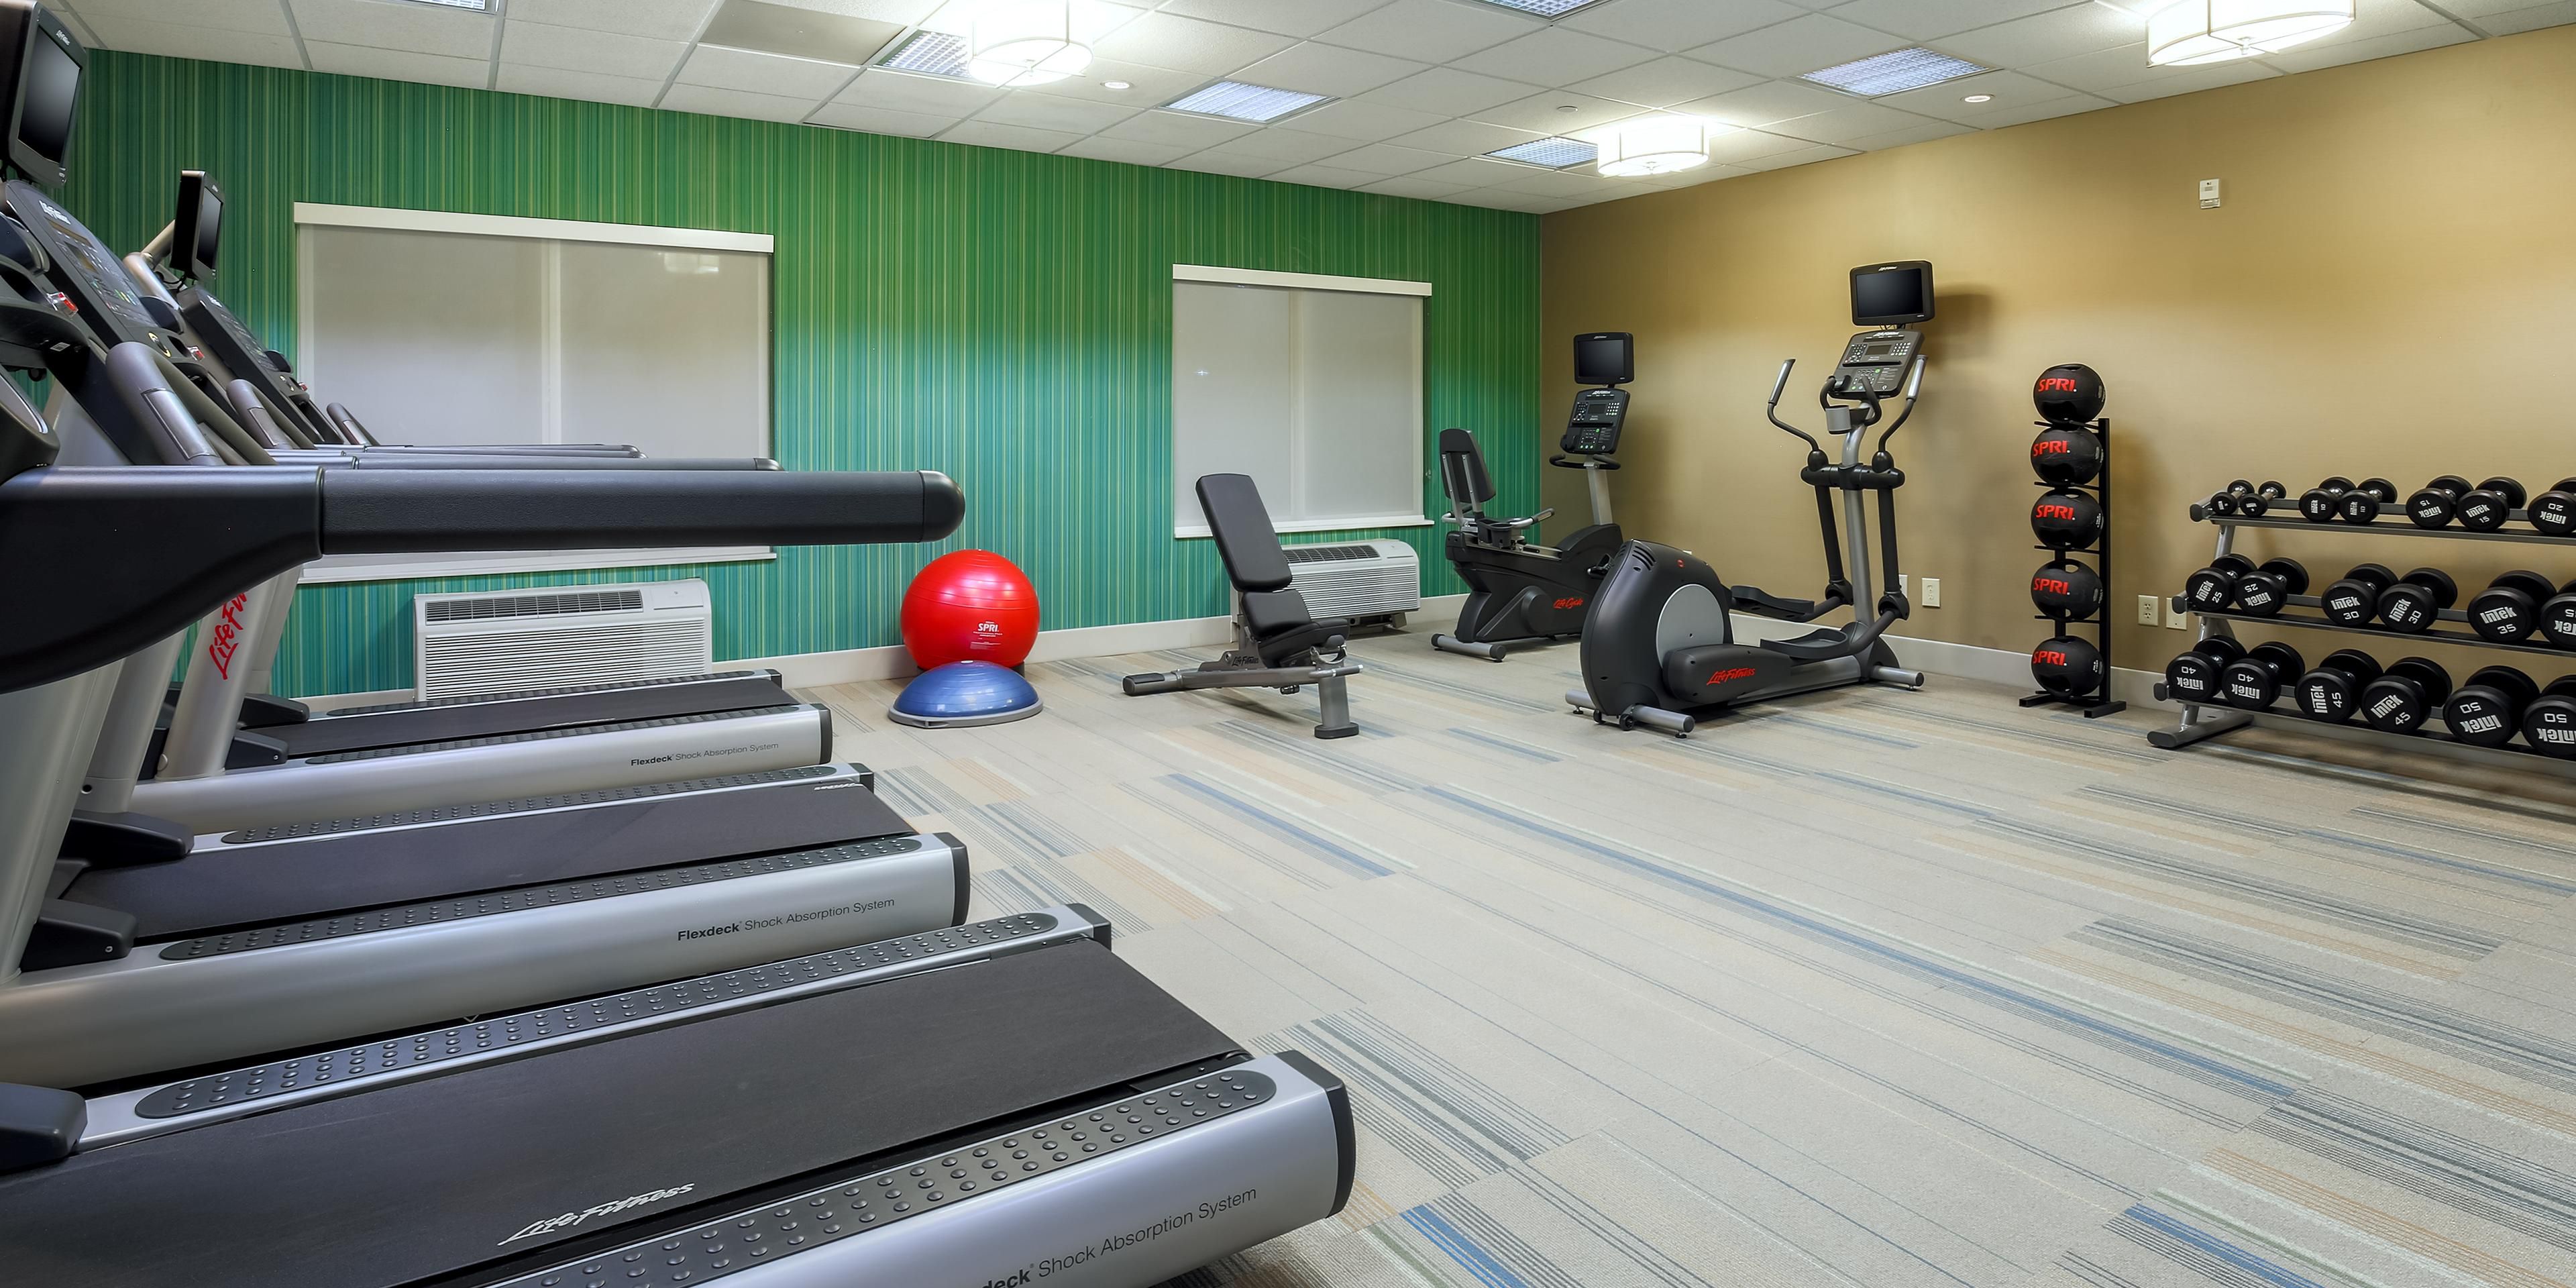 Keep up your routine on the road with our convenient on-site fitness center. With a range of cardiovascular equipment and free weights, our 24-hour workout facility will meet all of your needs.
